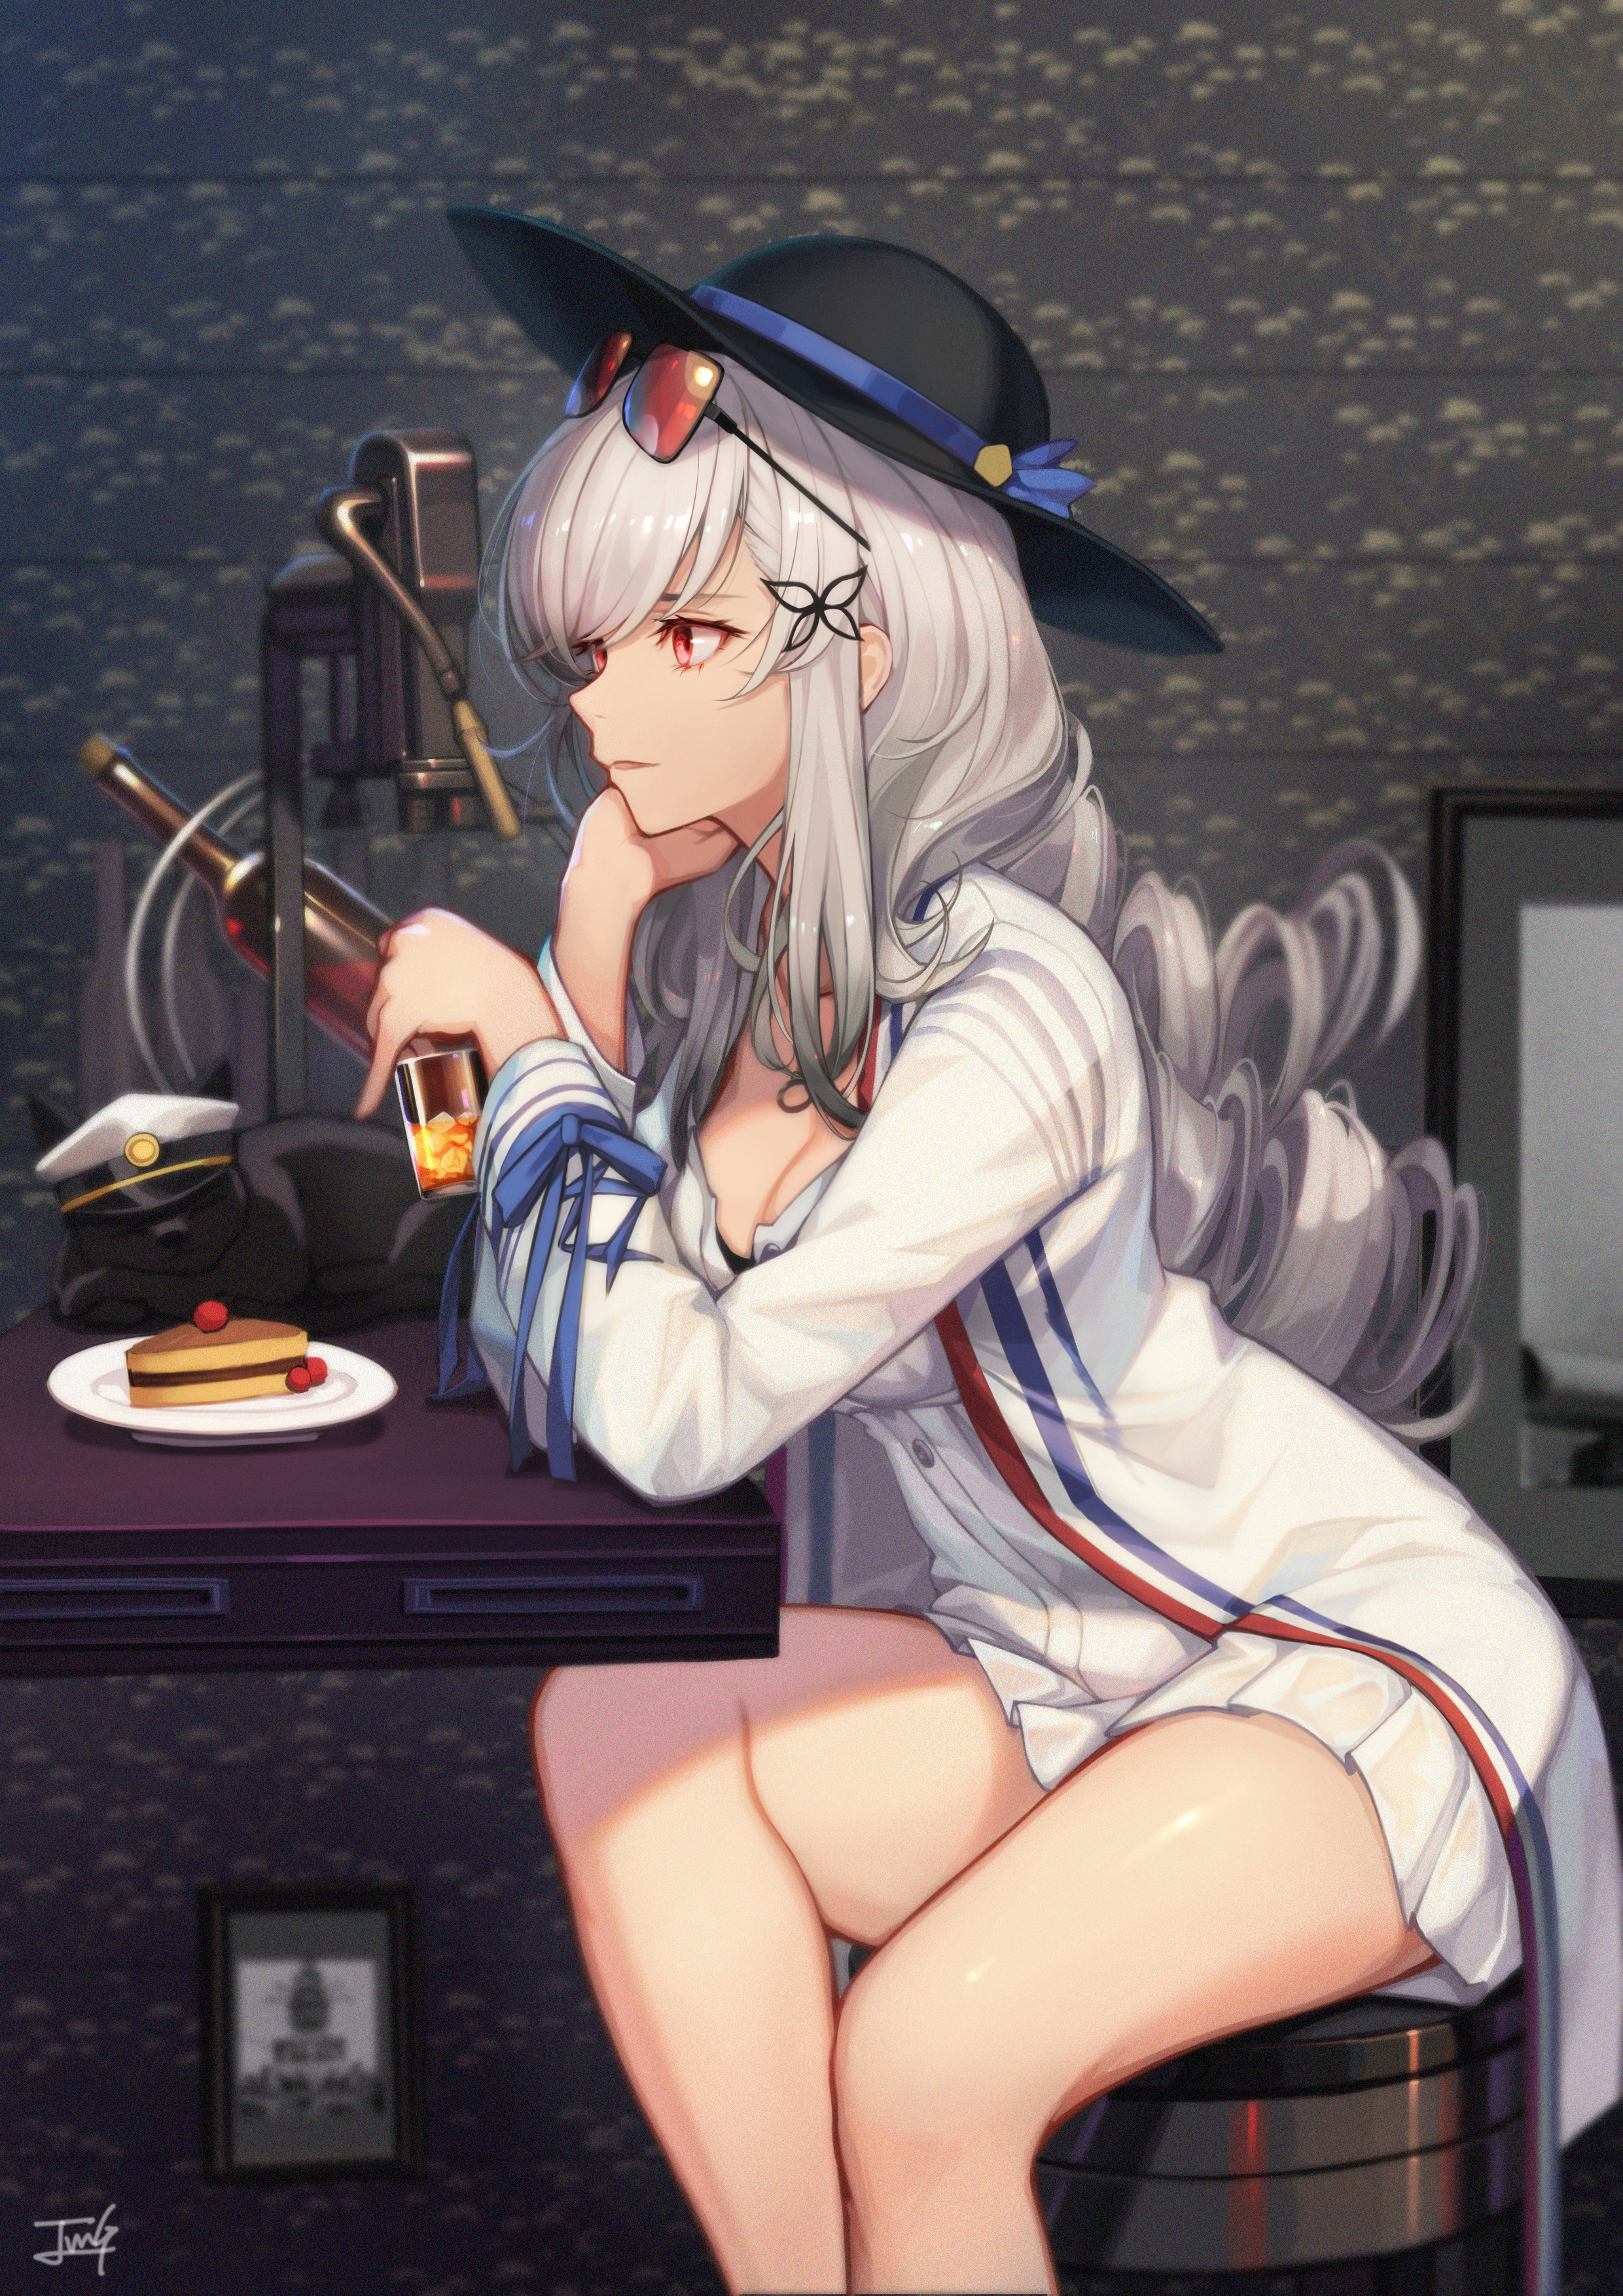 Anime 2480x3508 anime silver hair red eyes portrait display digital art anime girls Dunkerque (Azur Lane) hat Azur Lane cleavage looking away artwork sitting skirt frills dress Baek Hyang 2D plates food drink glass bottle signature sunglasses stools thighs cats cake blurred jacket drinking glass bar stool parted lips long hair